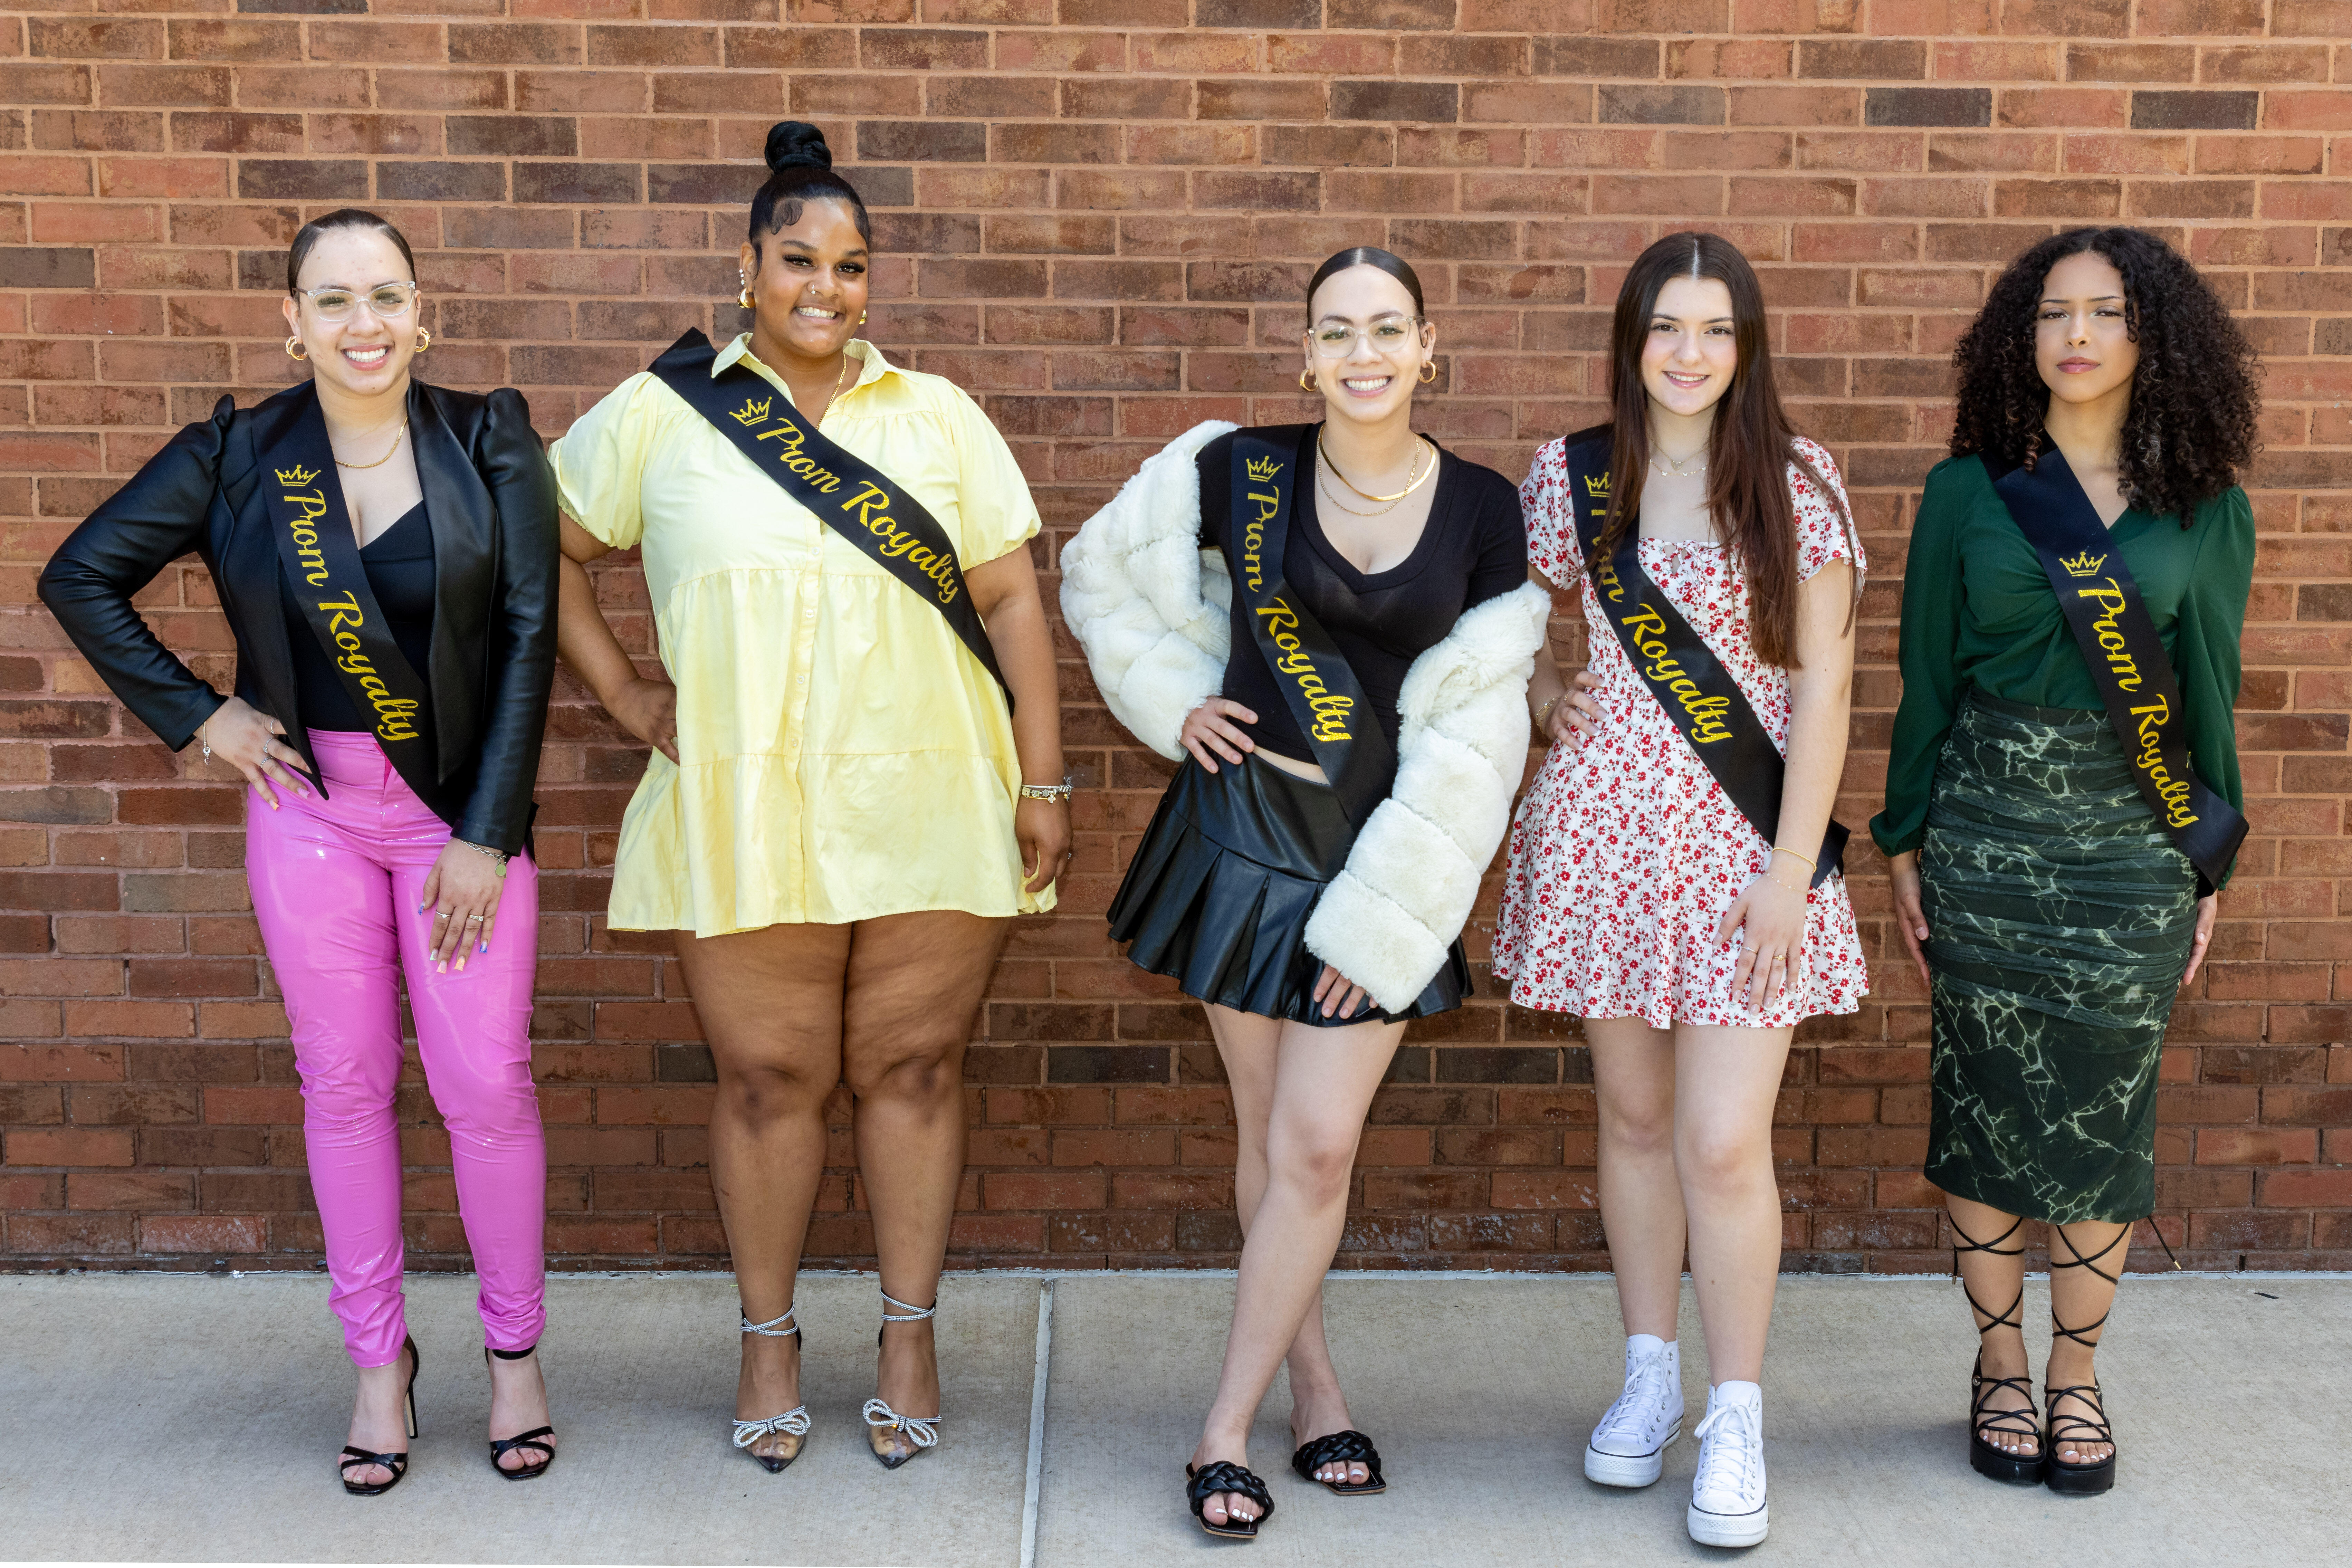 Princesses from the Steel Valley prom court pose for a photo